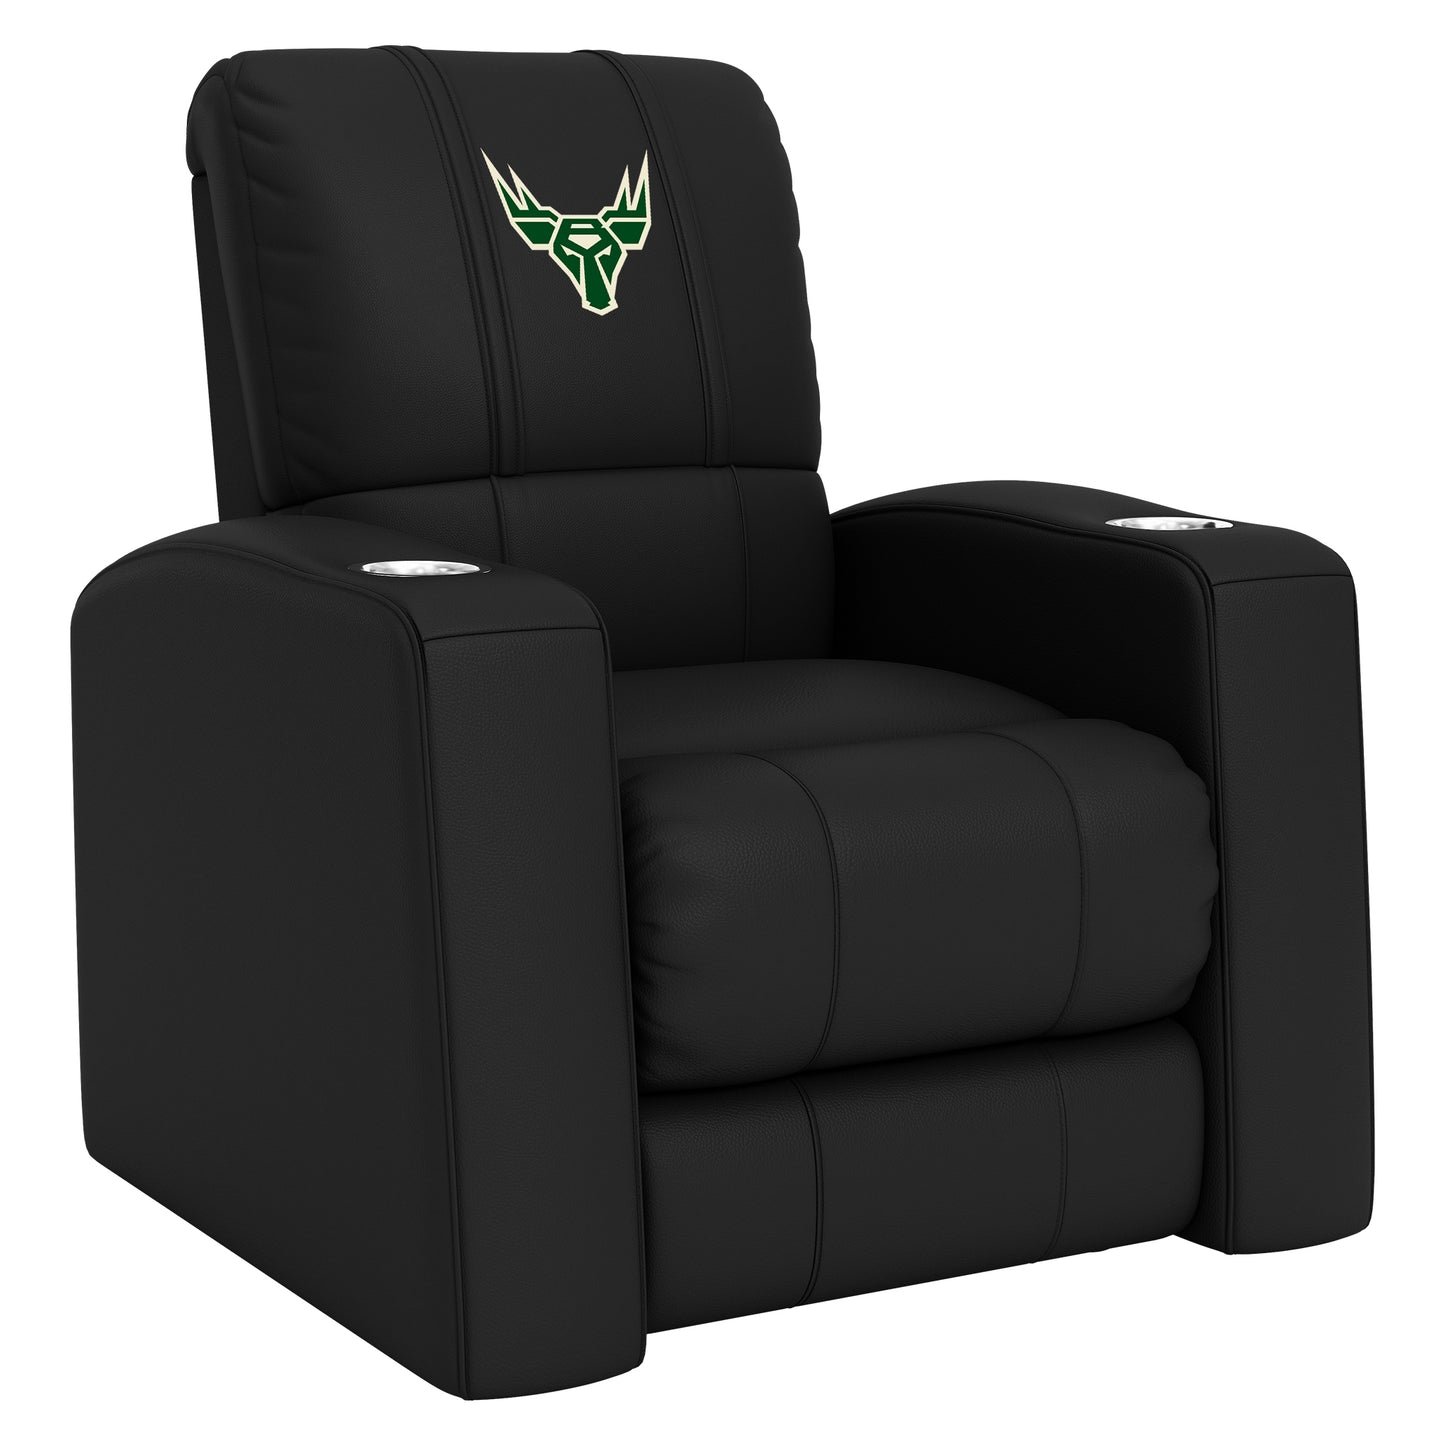 Relax Home Theater Recliner with Bucks Gaming Primary Logo [Can Only Be Shipped to Wisconsin]